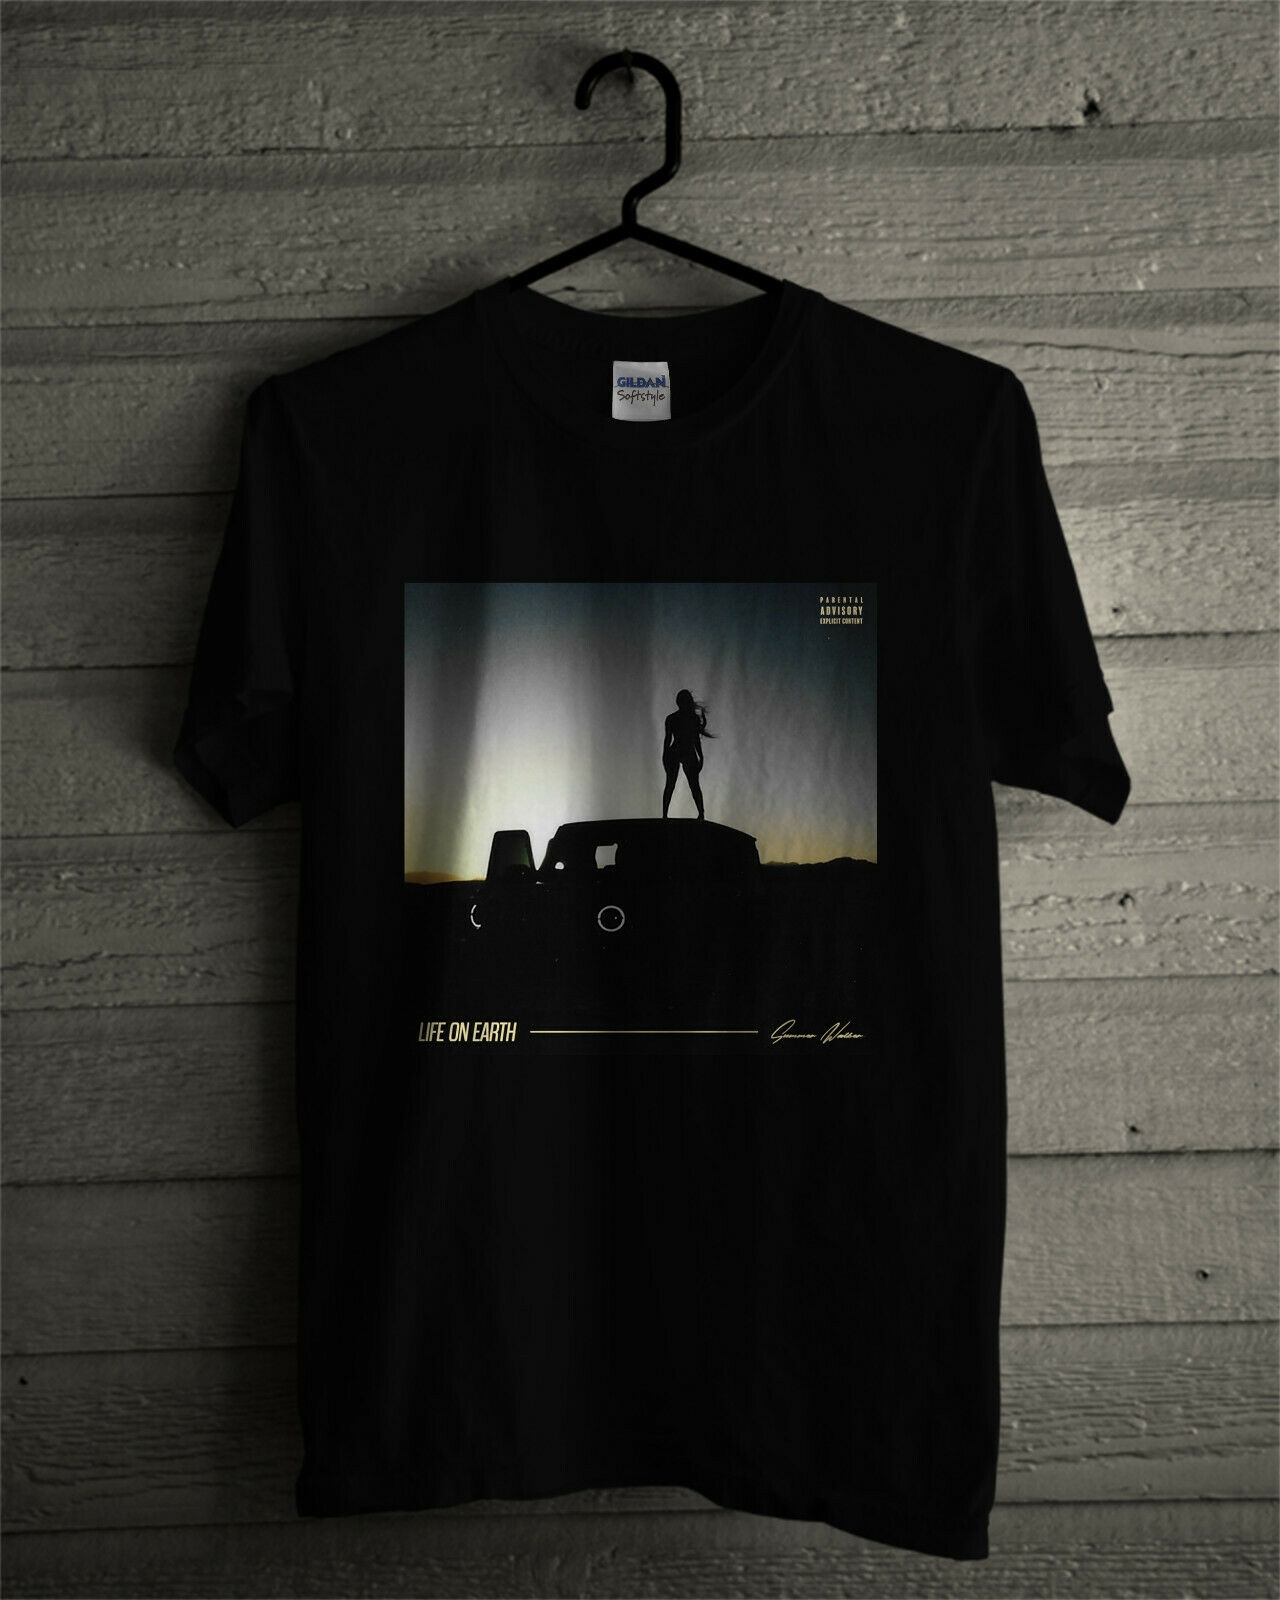 Download Summer Walker Life On Earth Album Cover T Shirt Xetsy